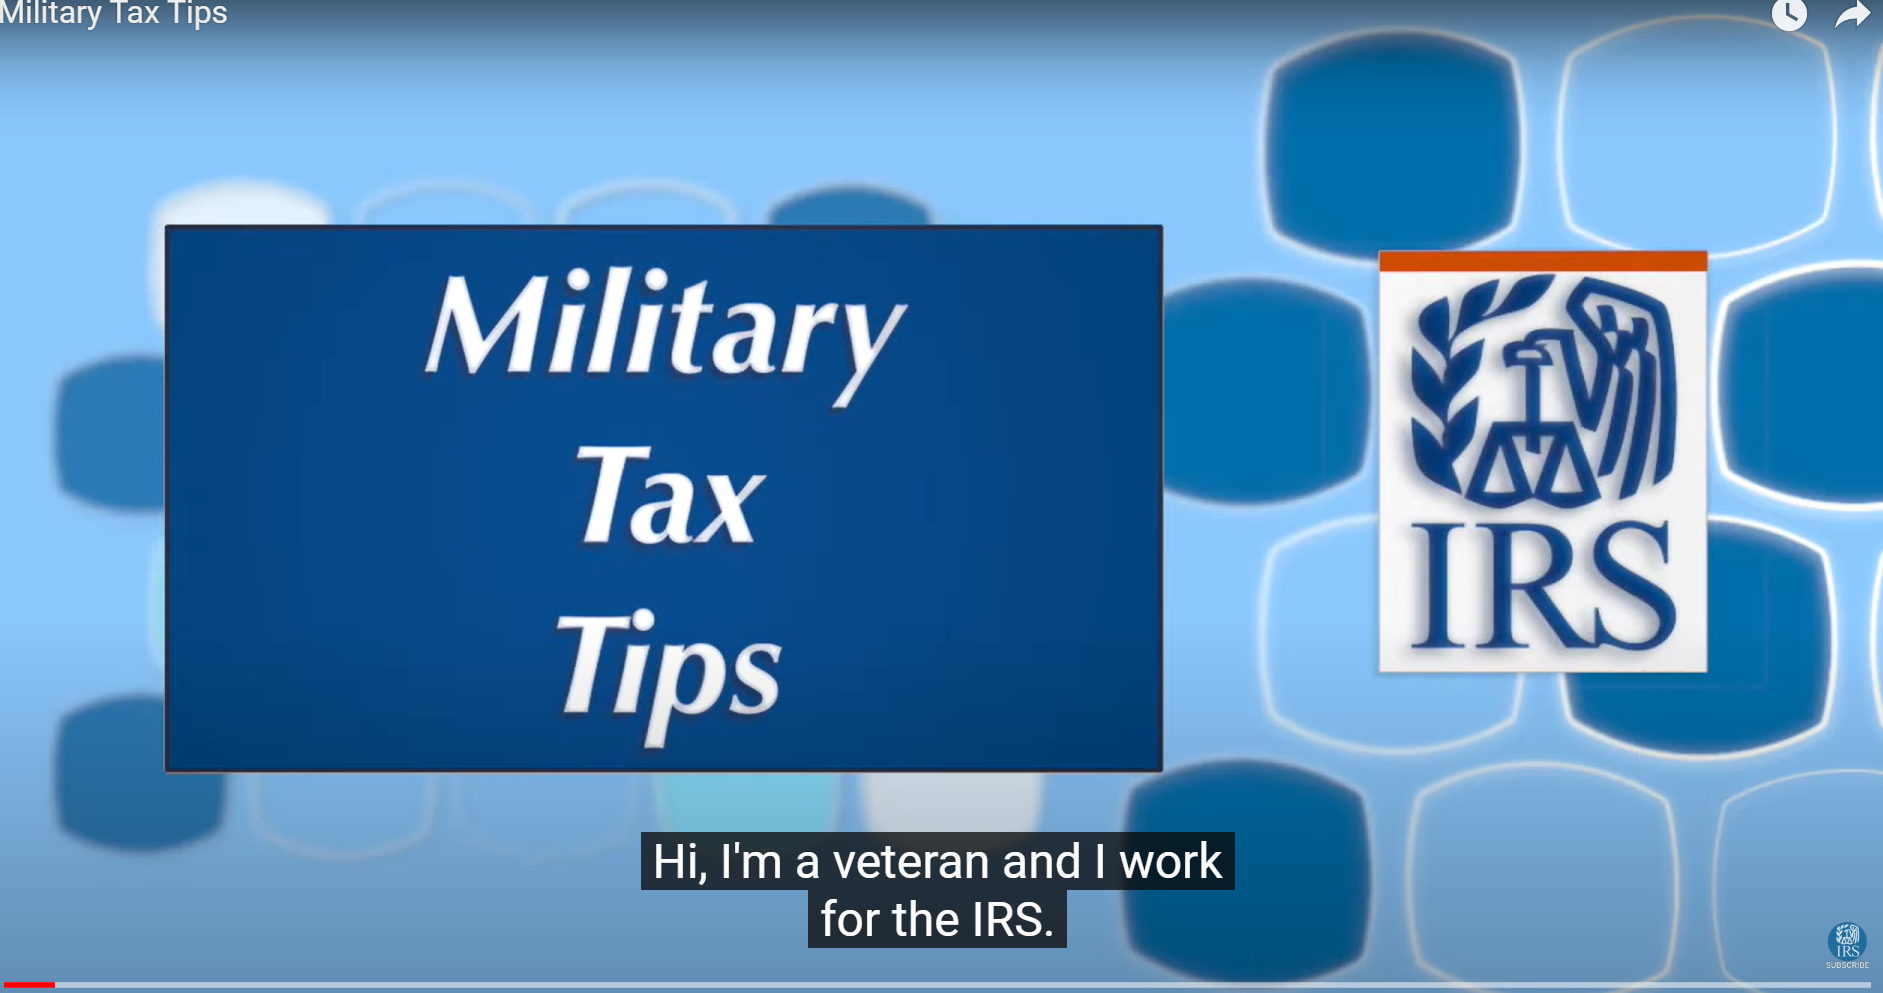 Learn about the special tax benefits that apply to members of the Armed Forces.